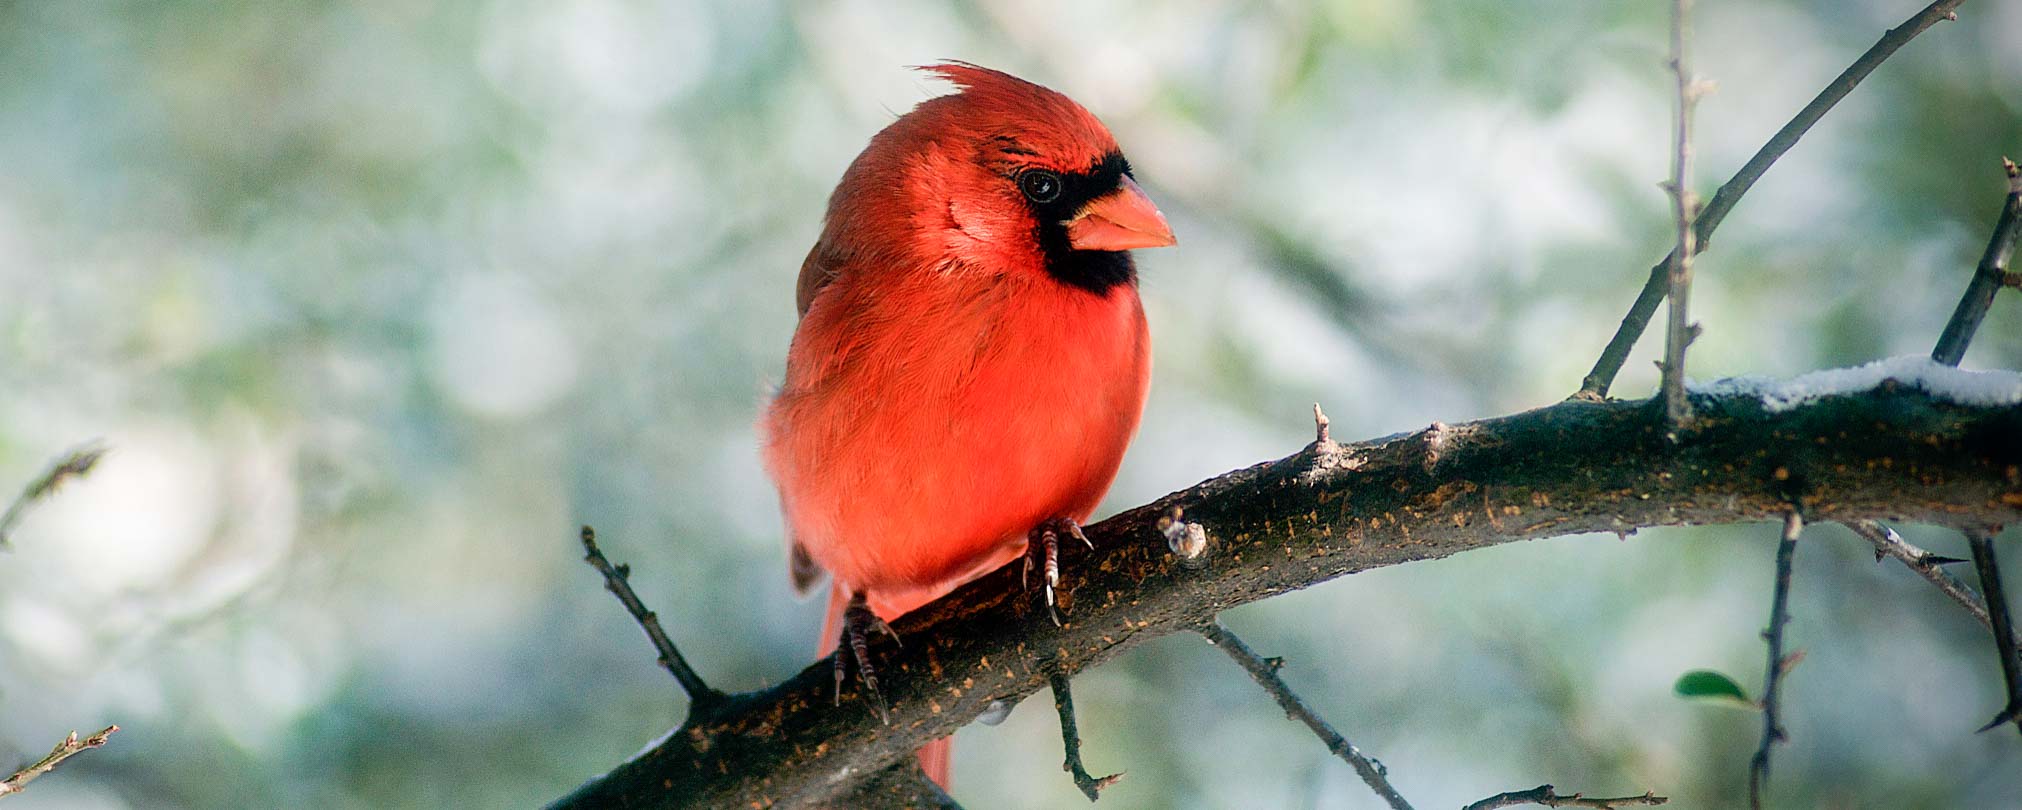 Cardinal sitting on an icy branch in winter